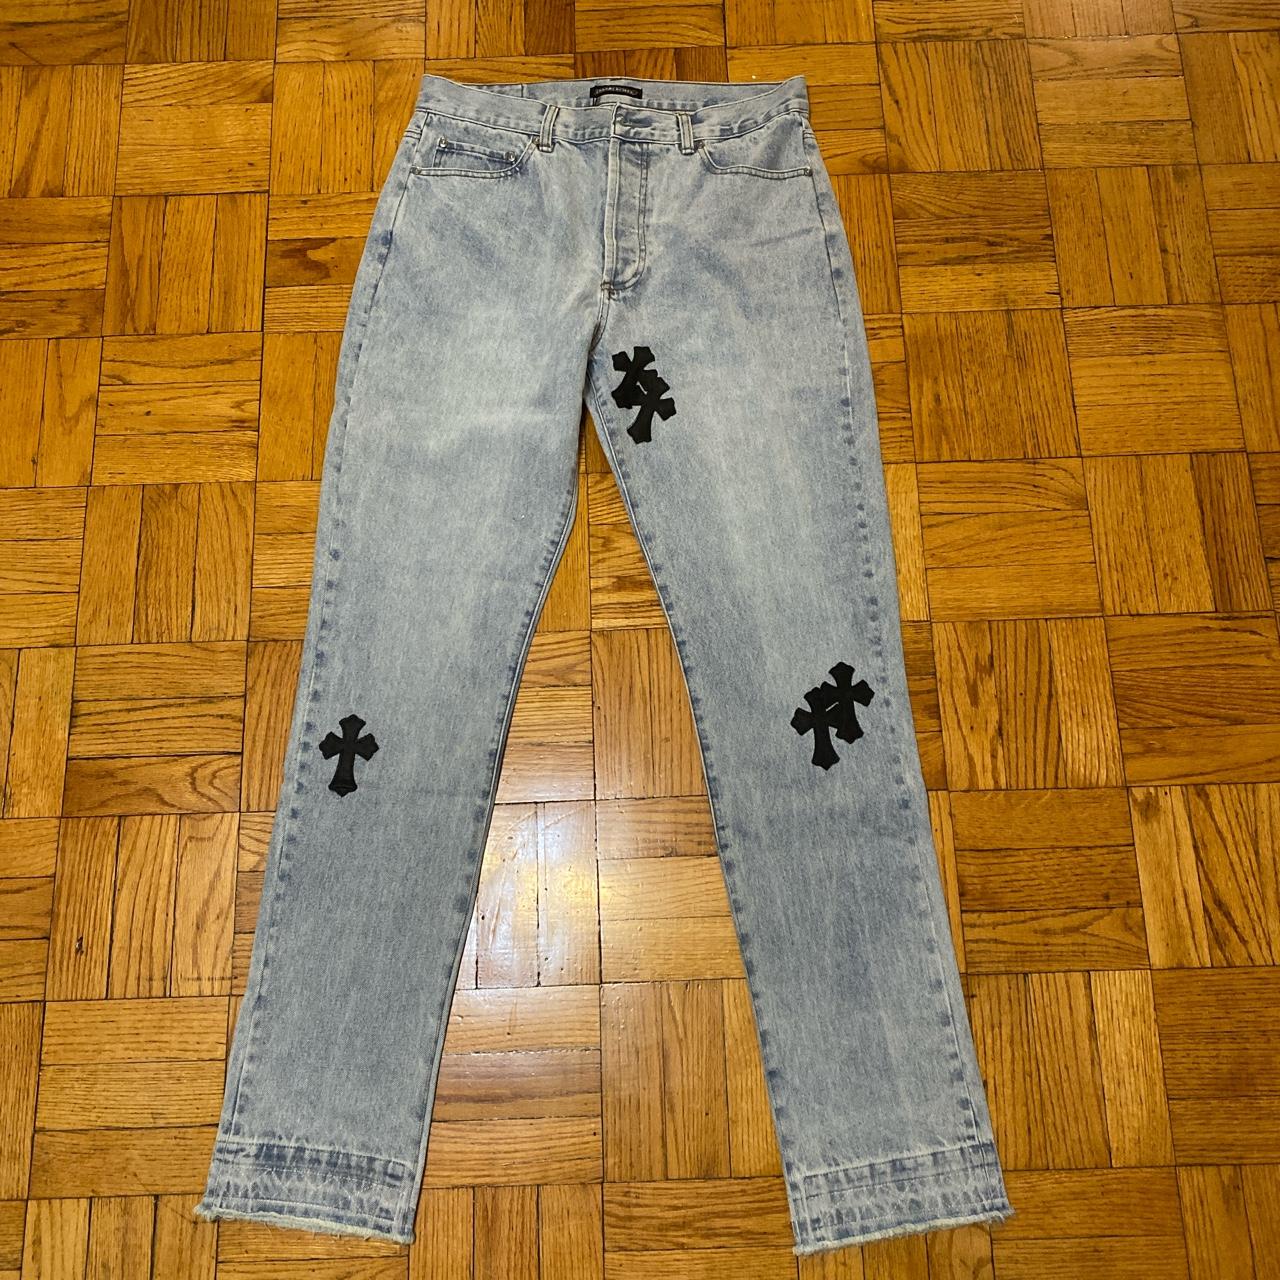 VNDS Chrome Hearts Jeans, can provide more photos